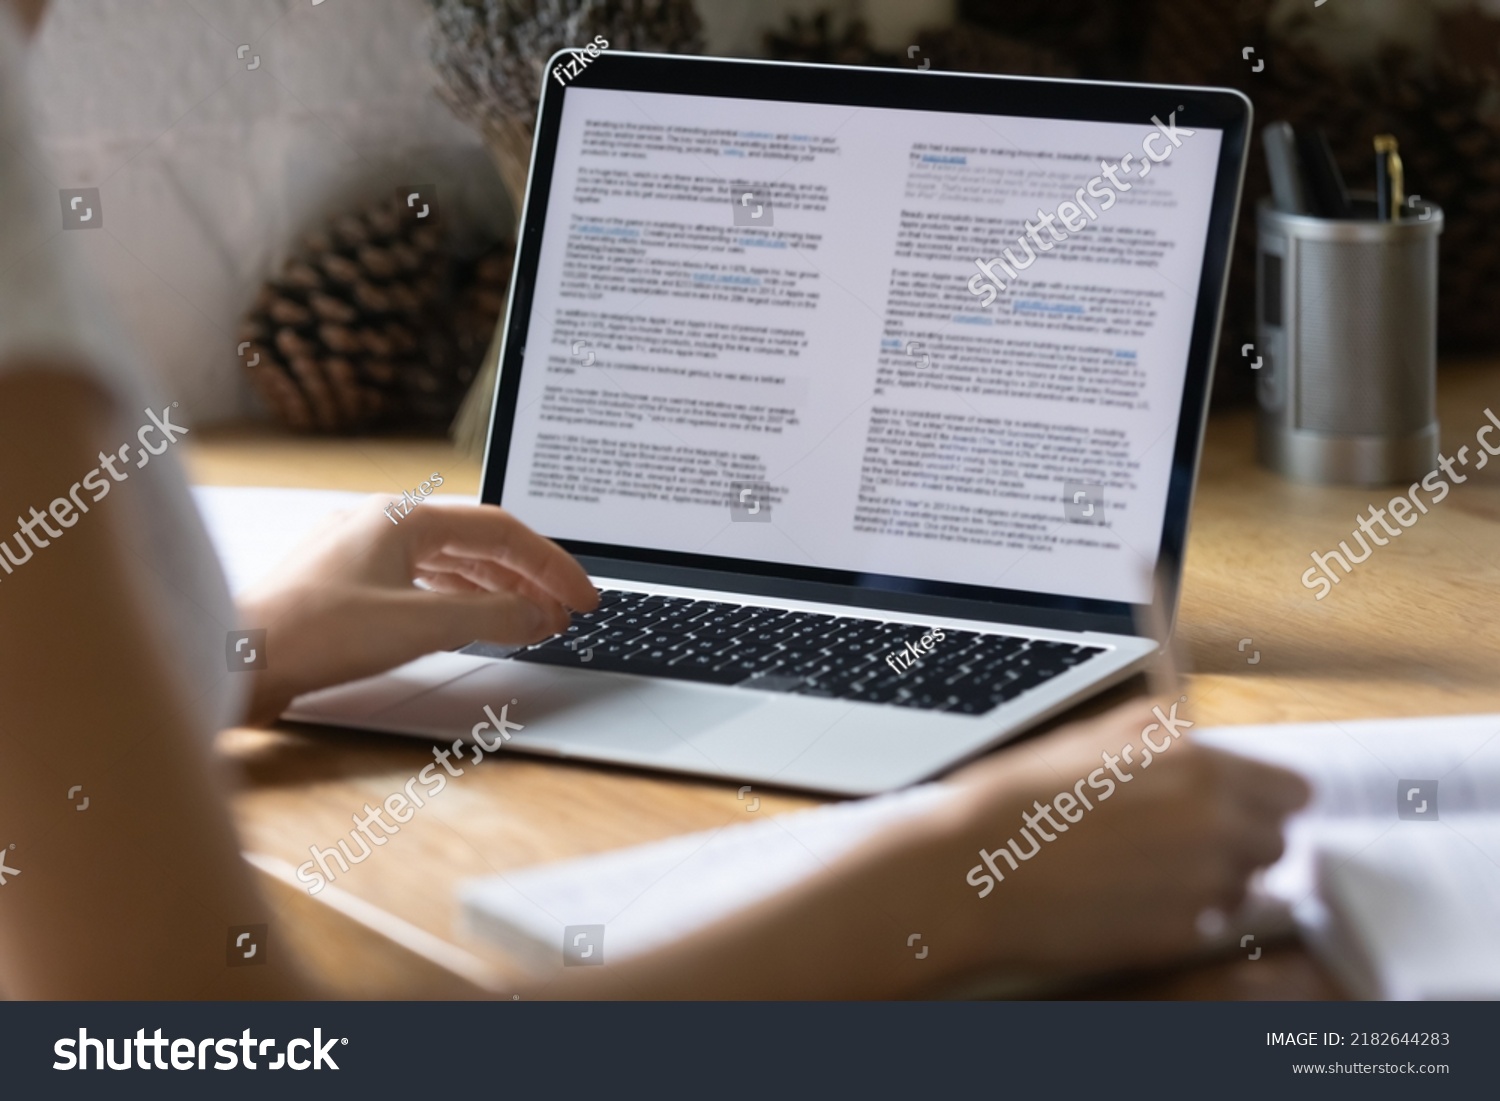 Close up view of modern technology digital gadget opened computer with electronic documents on screen. Young woman preparing report or reading scientific article, studying at home, education concept. #2182644283